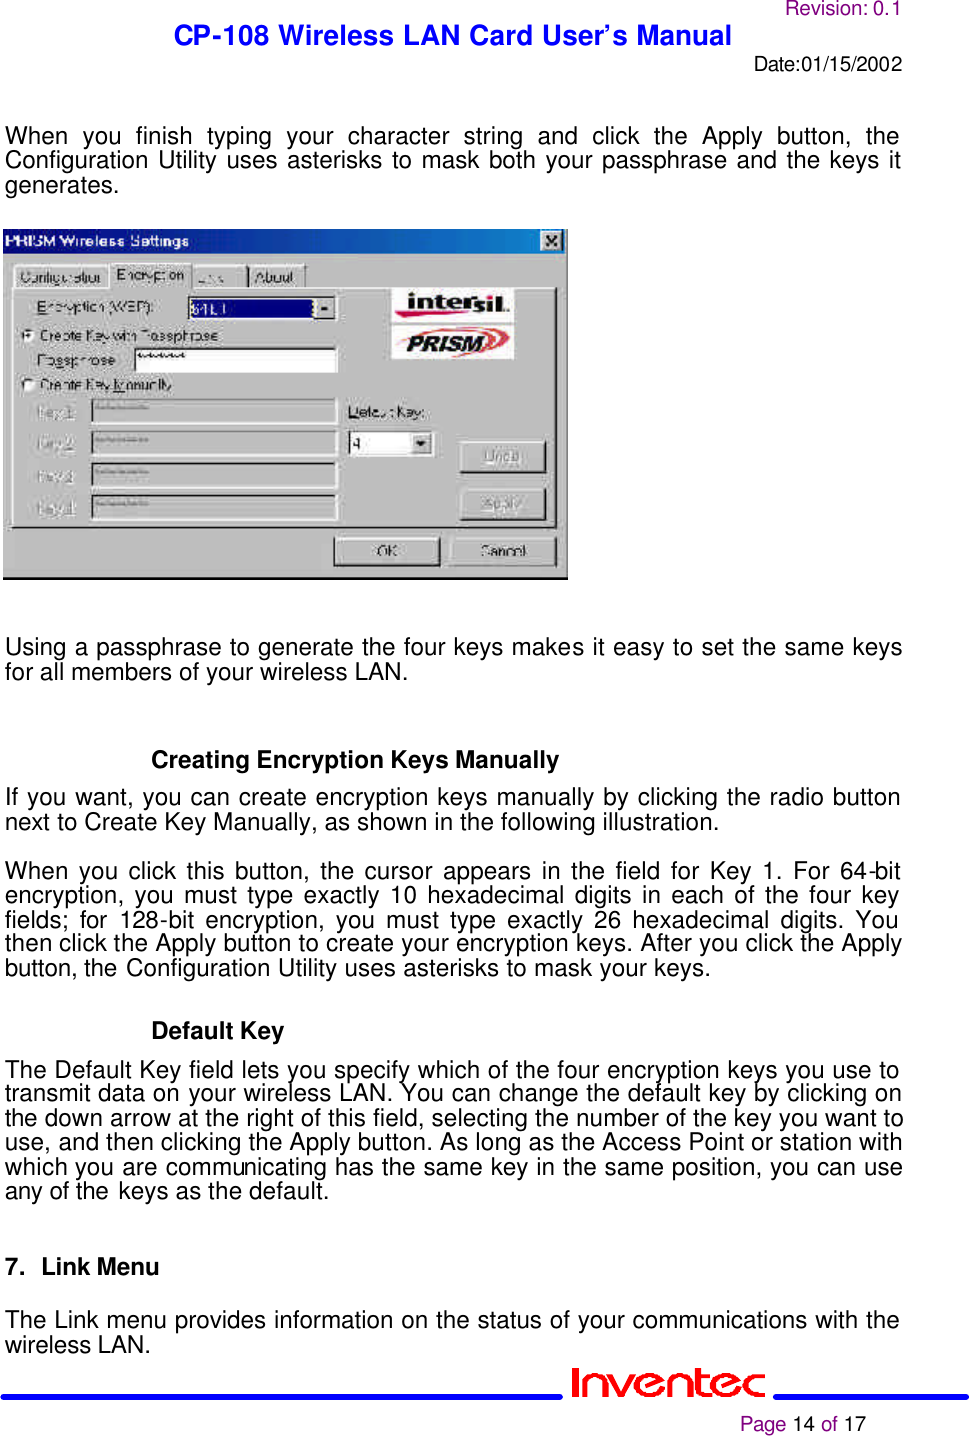 Revision: 0.1 CP-108 Wireless LAN Card User’s Manual Date:01/15/2002                                                                                                                                                             Page 14 of 17   When you finish typing your character string and click the Apply button, the Configuration Utility uses asterisks to mask both your passphrase and the keys it generates.                   Using a passphrase to generate the four keys makes it easy to set the same keys for all members of your wireless LAN.   Creating Encryption Keys Manually If you want, you can create encryption keys manually by clicking the radio button next to Create Key Manually, as shown in the following illustration.  When you click this button, the cursor appears in the field for Key 1. For 64-bit encryption, you must type exactly 10 hexadecimal digits in each of the four key fields; for 128-bit encryption, you must type exactly 26 hexadecimal digits. You then click the Apply button to create your encryption keys. After you click the Apply button, the Configuration Utility uses asterisks to mask your keys.  Default Key The Default Key field lets you specify which of the four encryption keys you use to transmit data on your wireless LAN. You can change the default key by clicking on the down arrow at the right of this field, selecting the number of the key you want to use, and then clicking the Apply button. As long as the Access Point or station with which you are communicating has the same key in the same position, you can use any of the keys as the default.   7. Link Menu  The Link menu provides information on the status of your communications with the wireless LAN.  